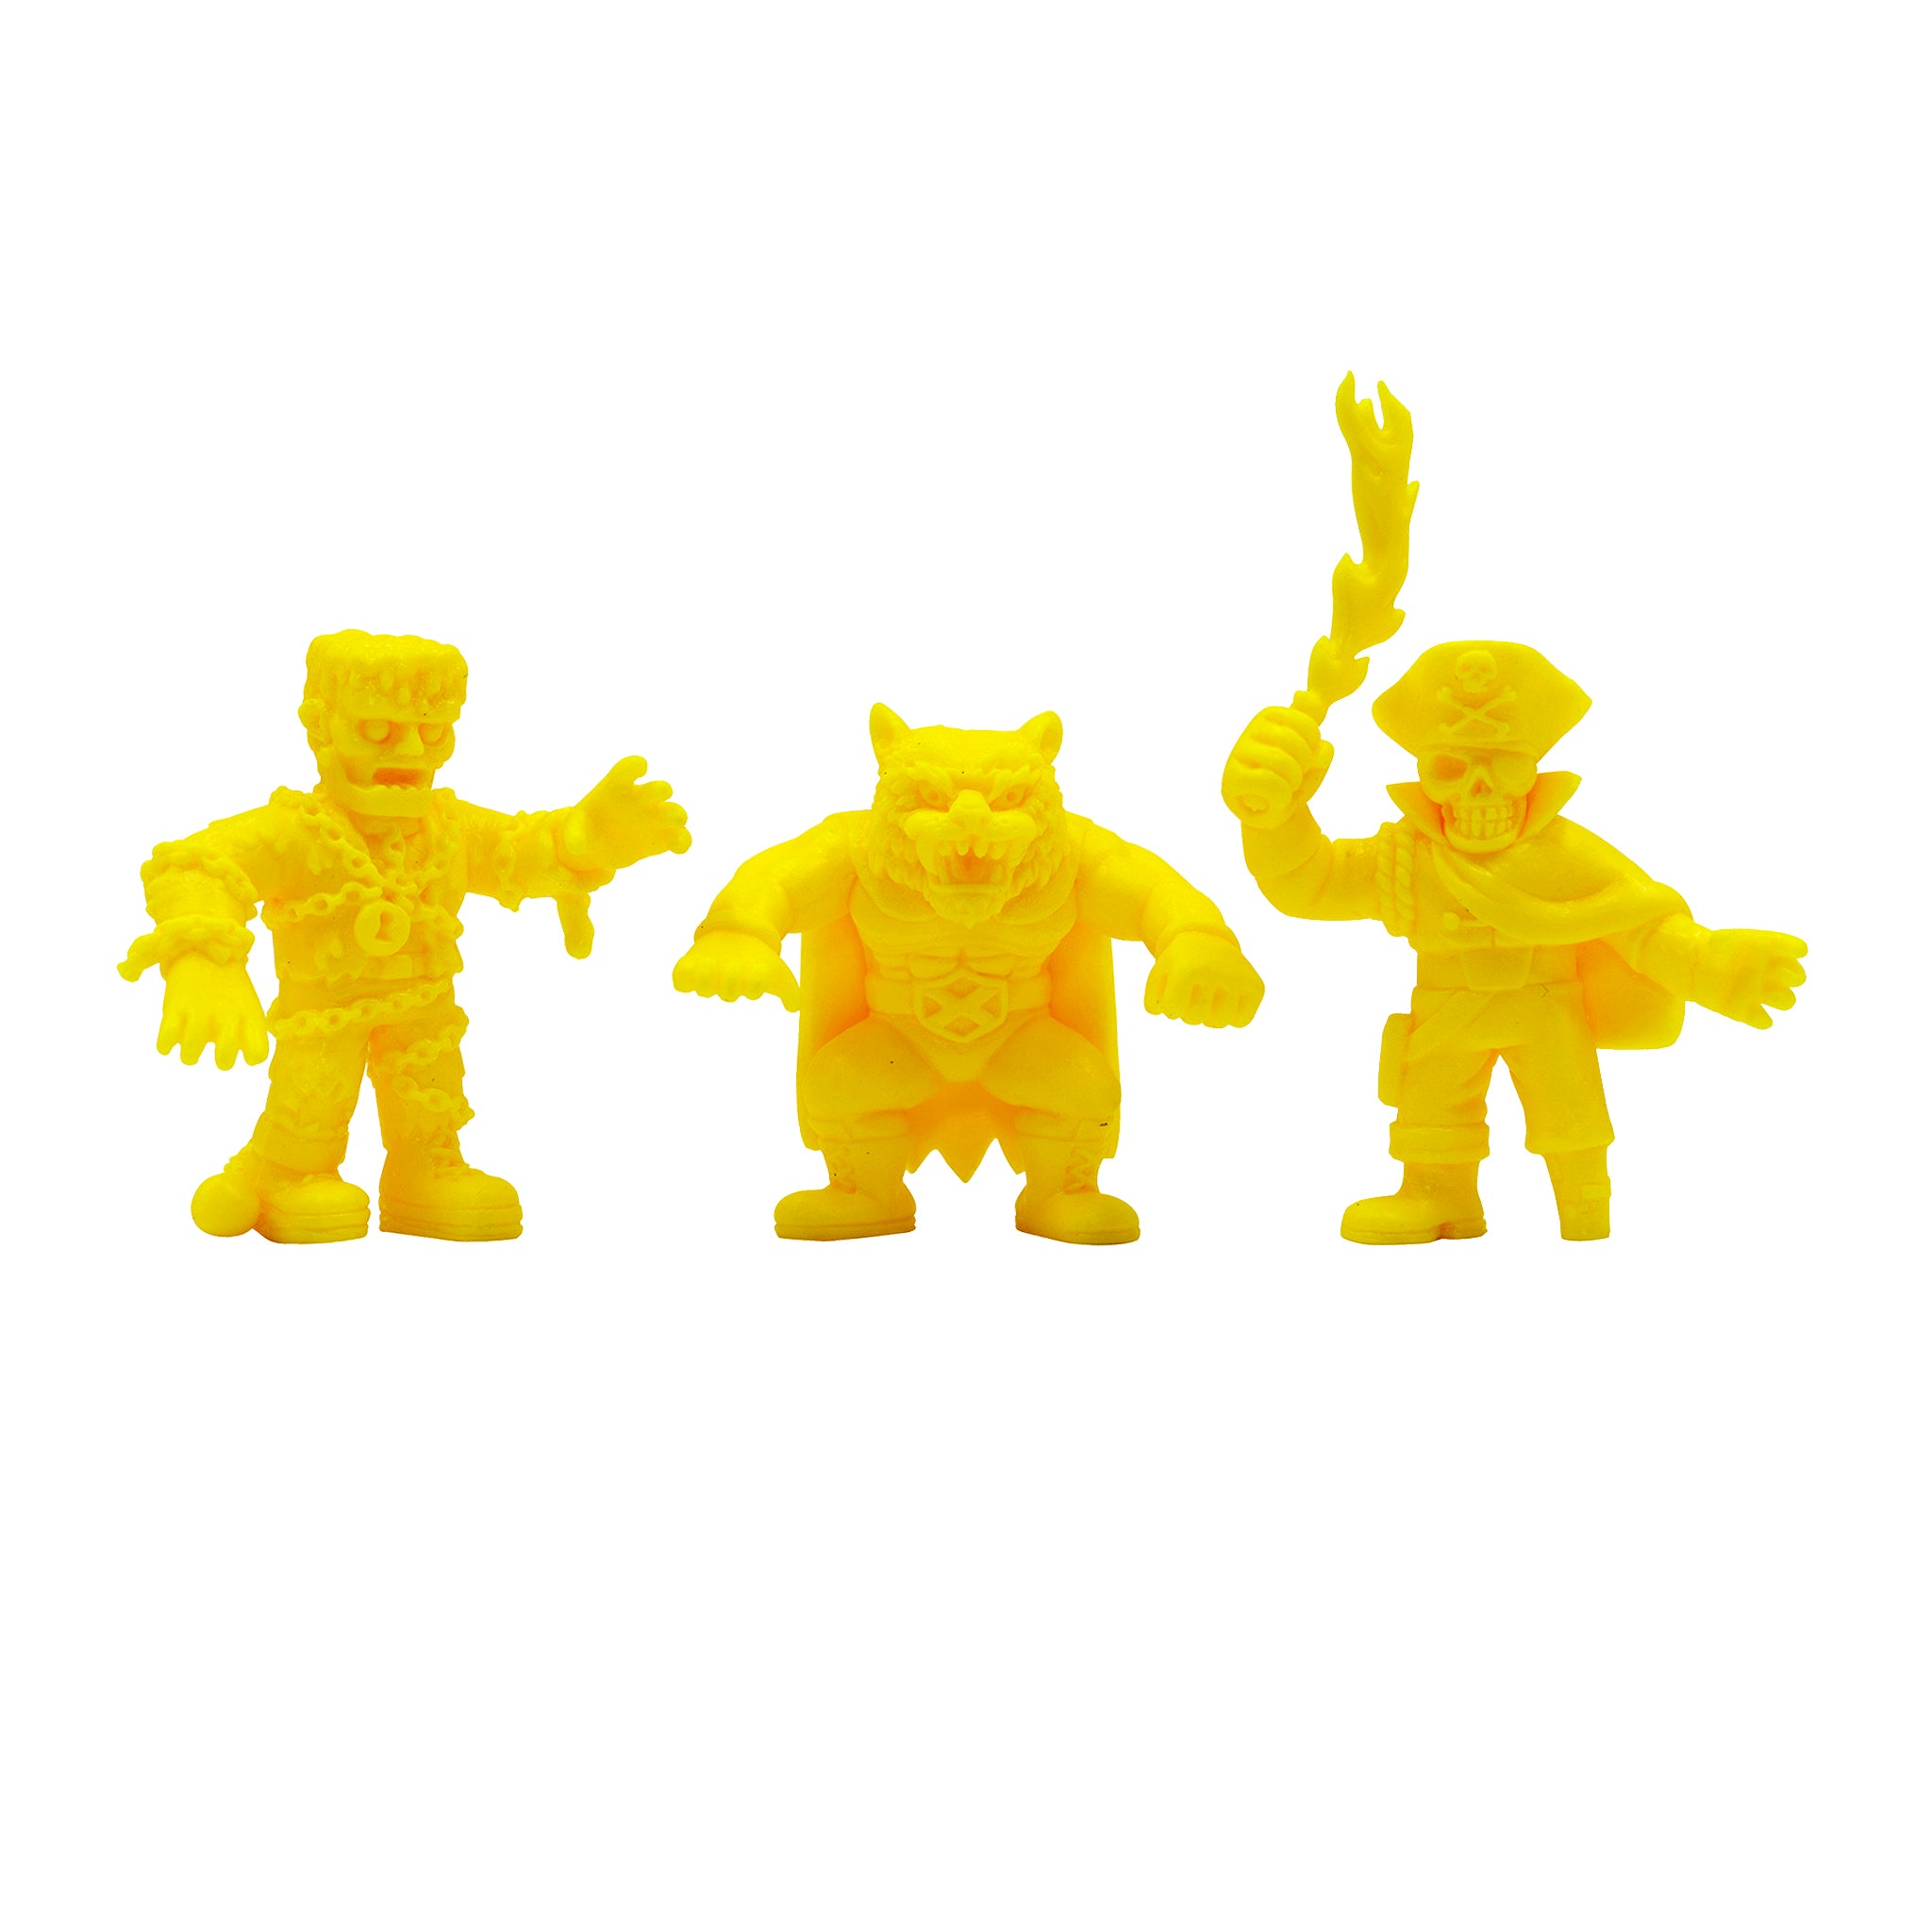 The Worst Keshi Pack A - Red Tiger, Captain Deadstar, Frankenghost (Yellow)